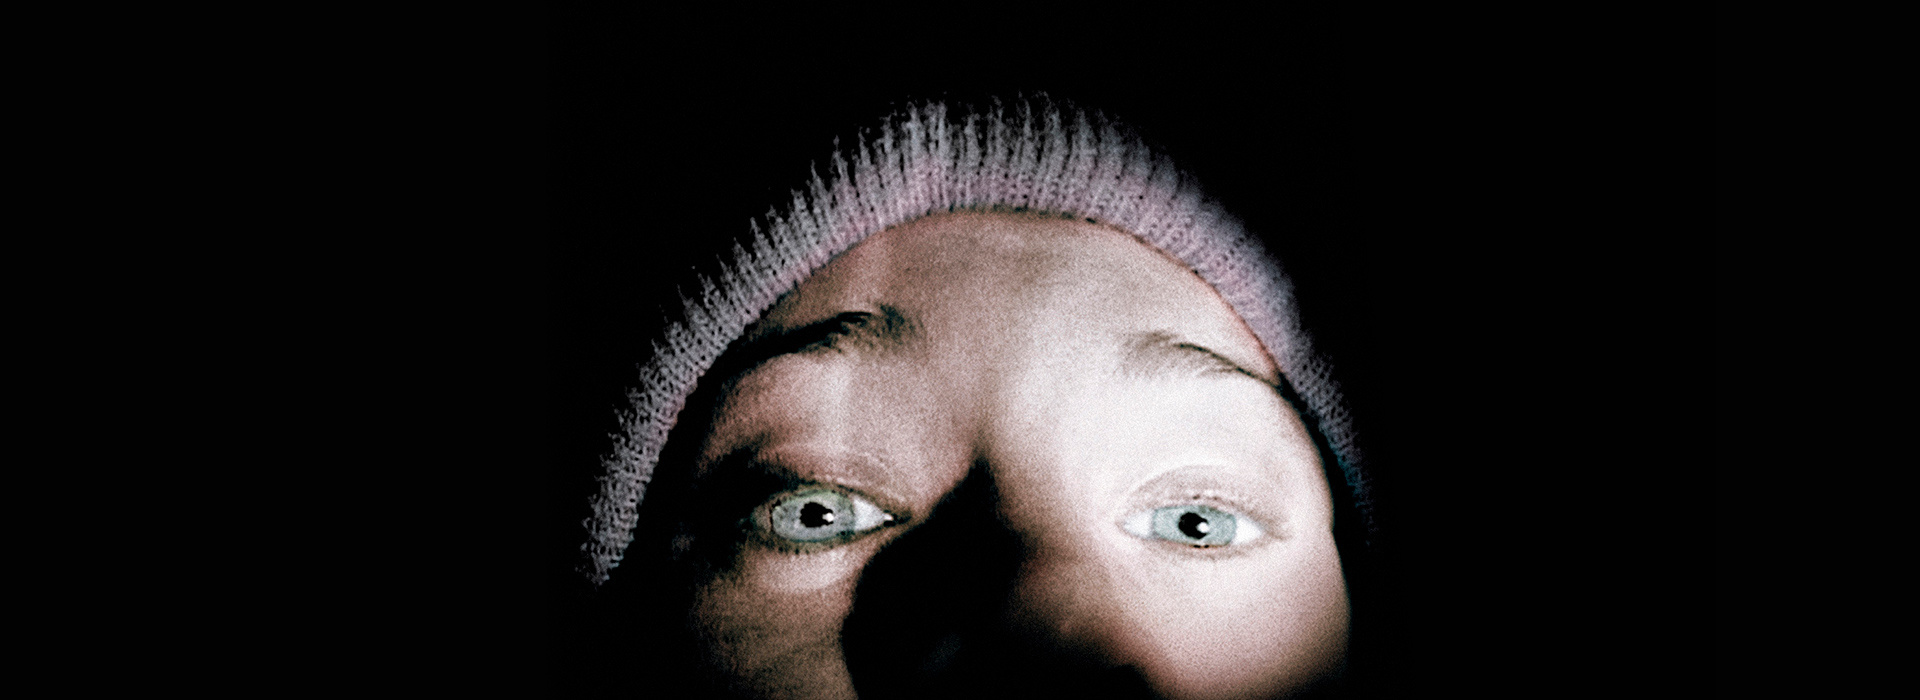 Movie poster The Blair Witch Project